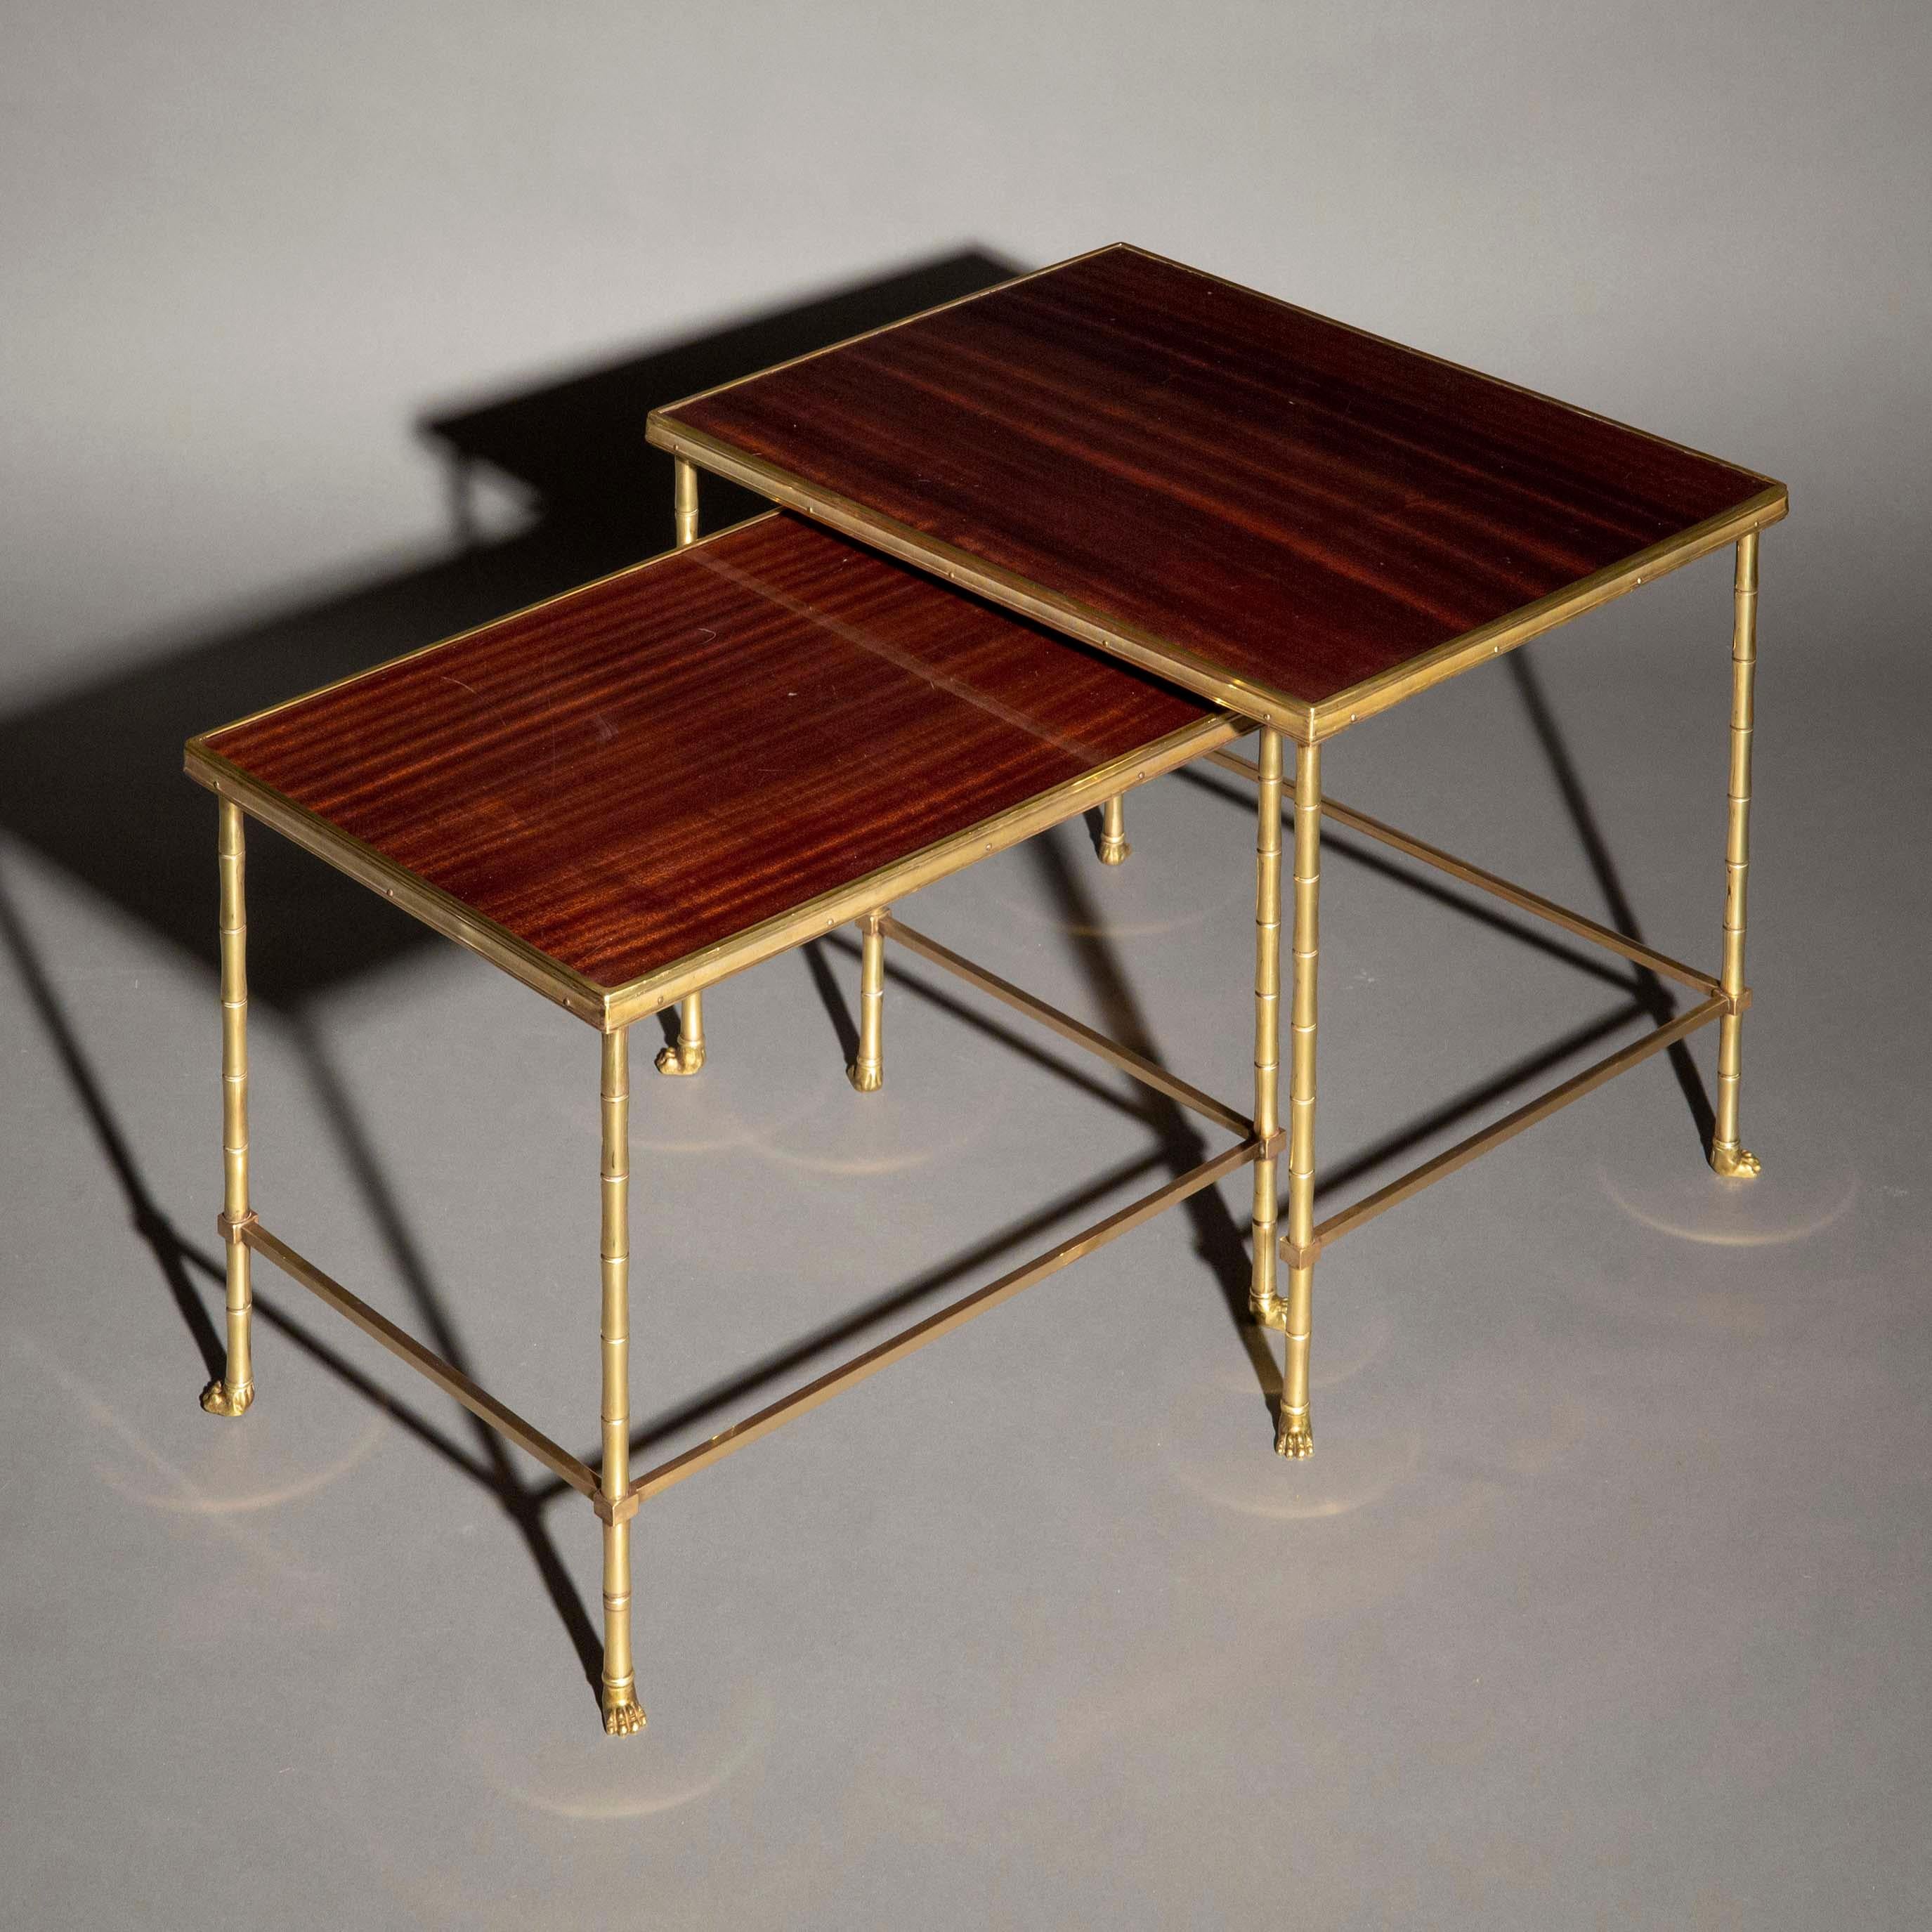 Polished Pair of Midcentury Brass Low Tables in the style of Maison Baguès